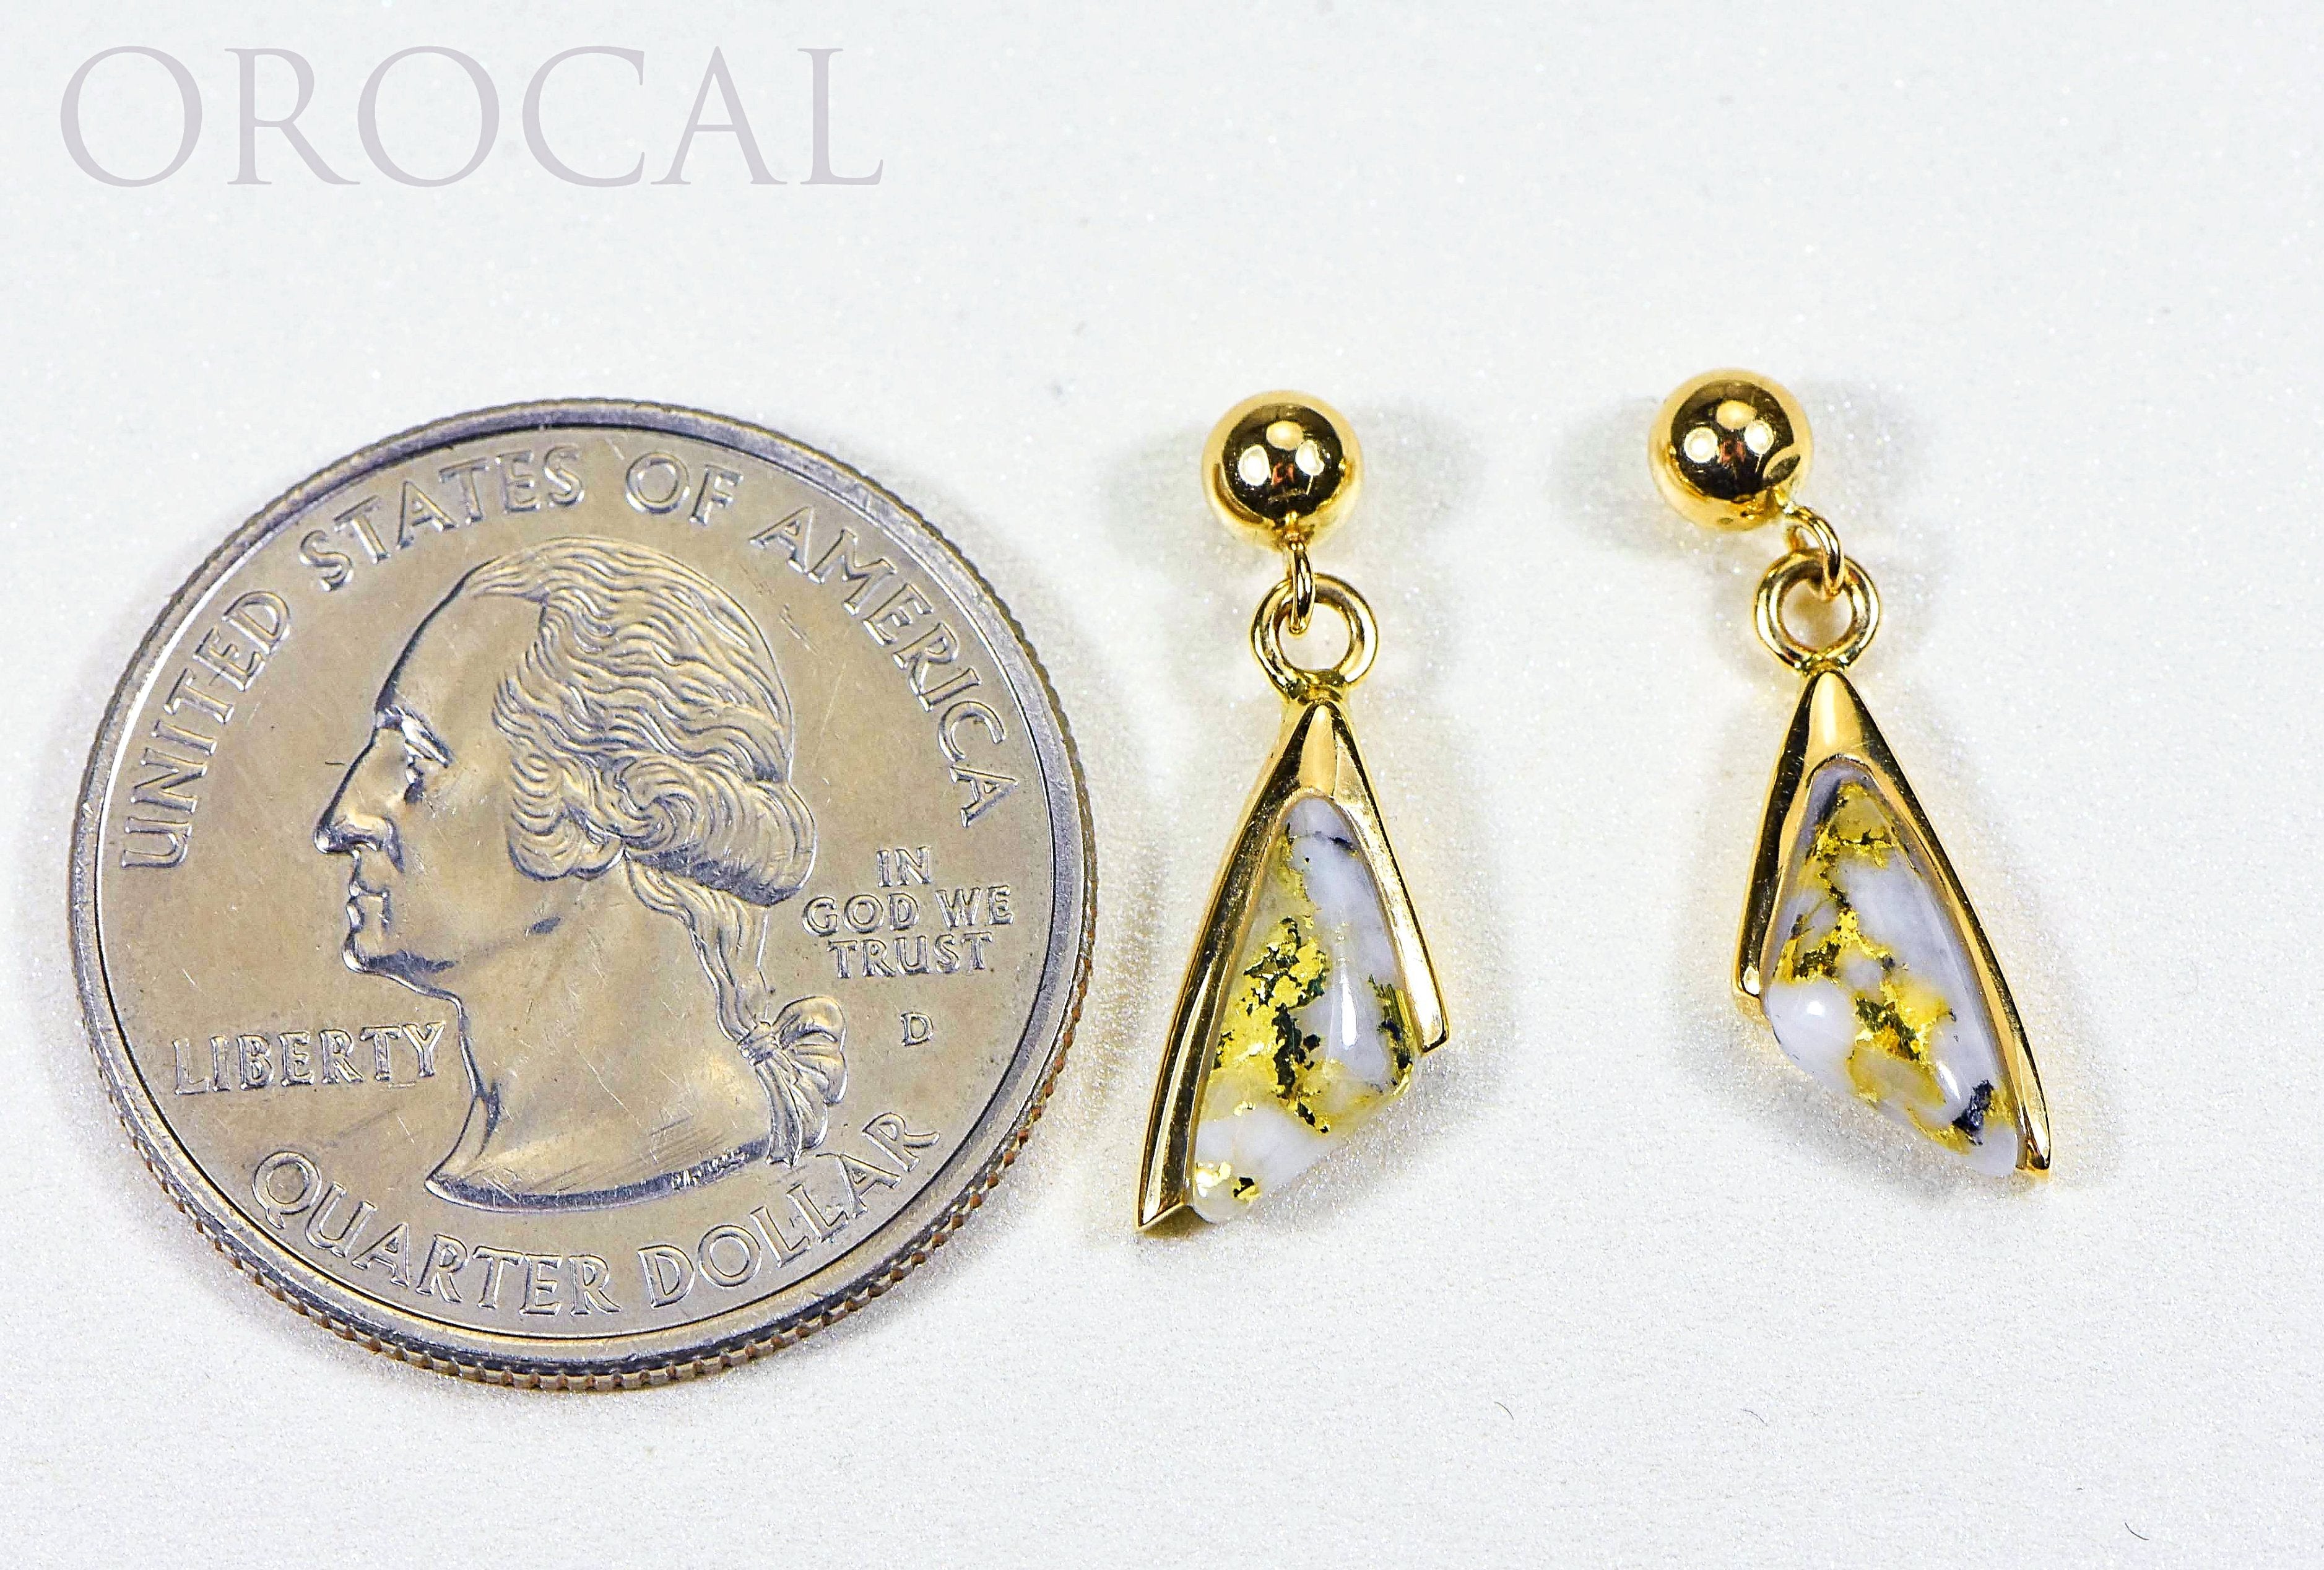 Gold Quartz Earrings "Orocal" EDL25SQ/PD Genuine Hand Crafted Jewelry - 14K Gold Casting